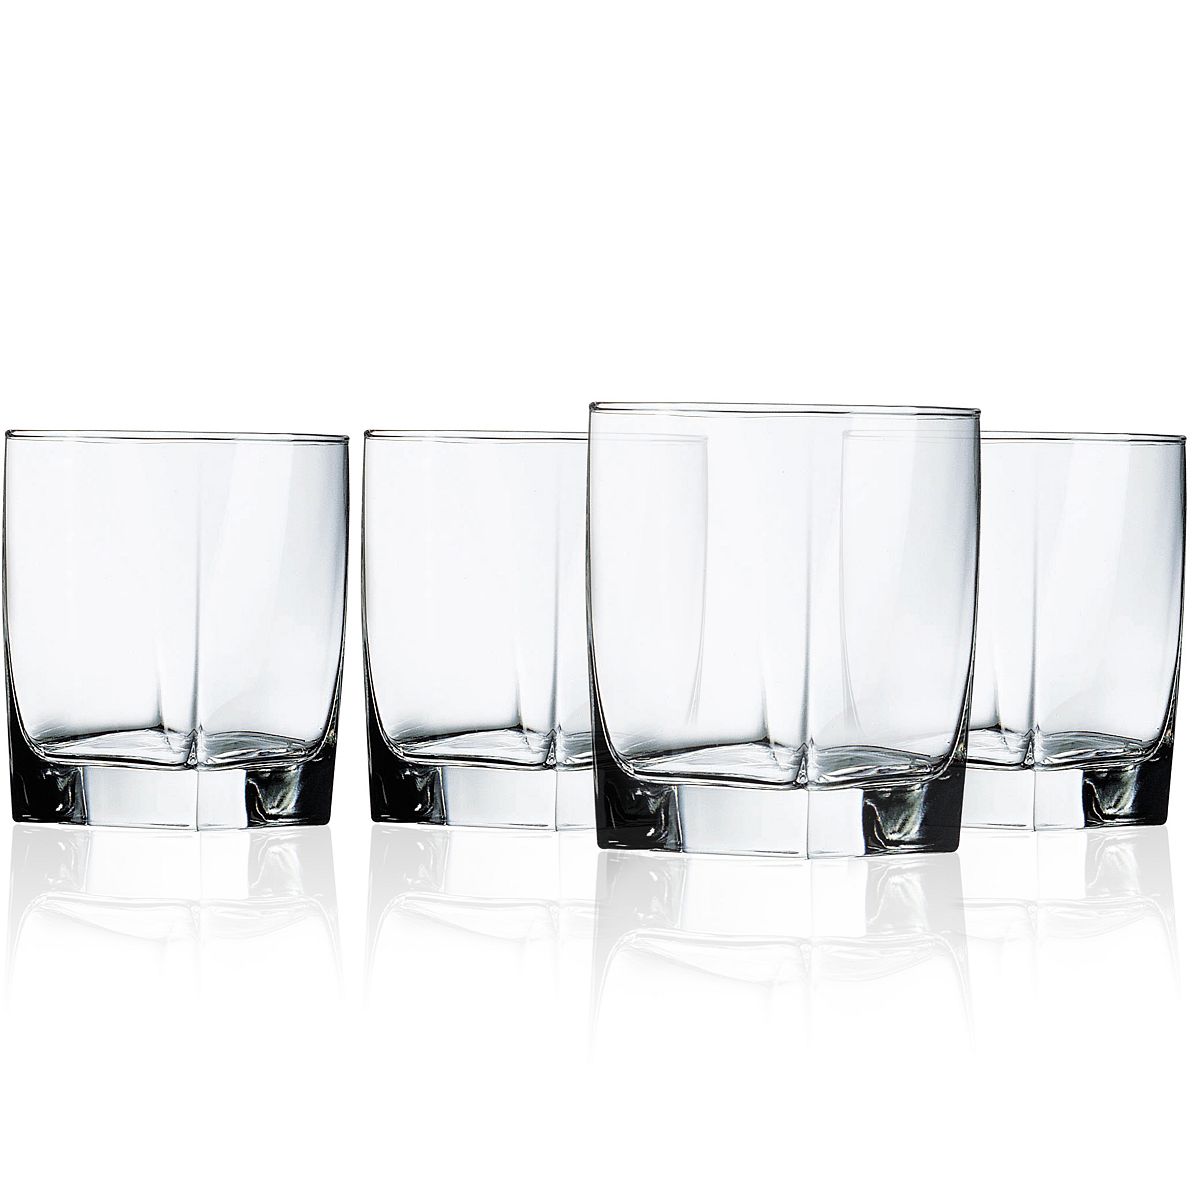 https://theseason.com/image/cache/products/2022/11/luminarc-sterling-13-oz-double-old-fashion-glass-set-of-4-clear-581266055-1200x1200.jpg